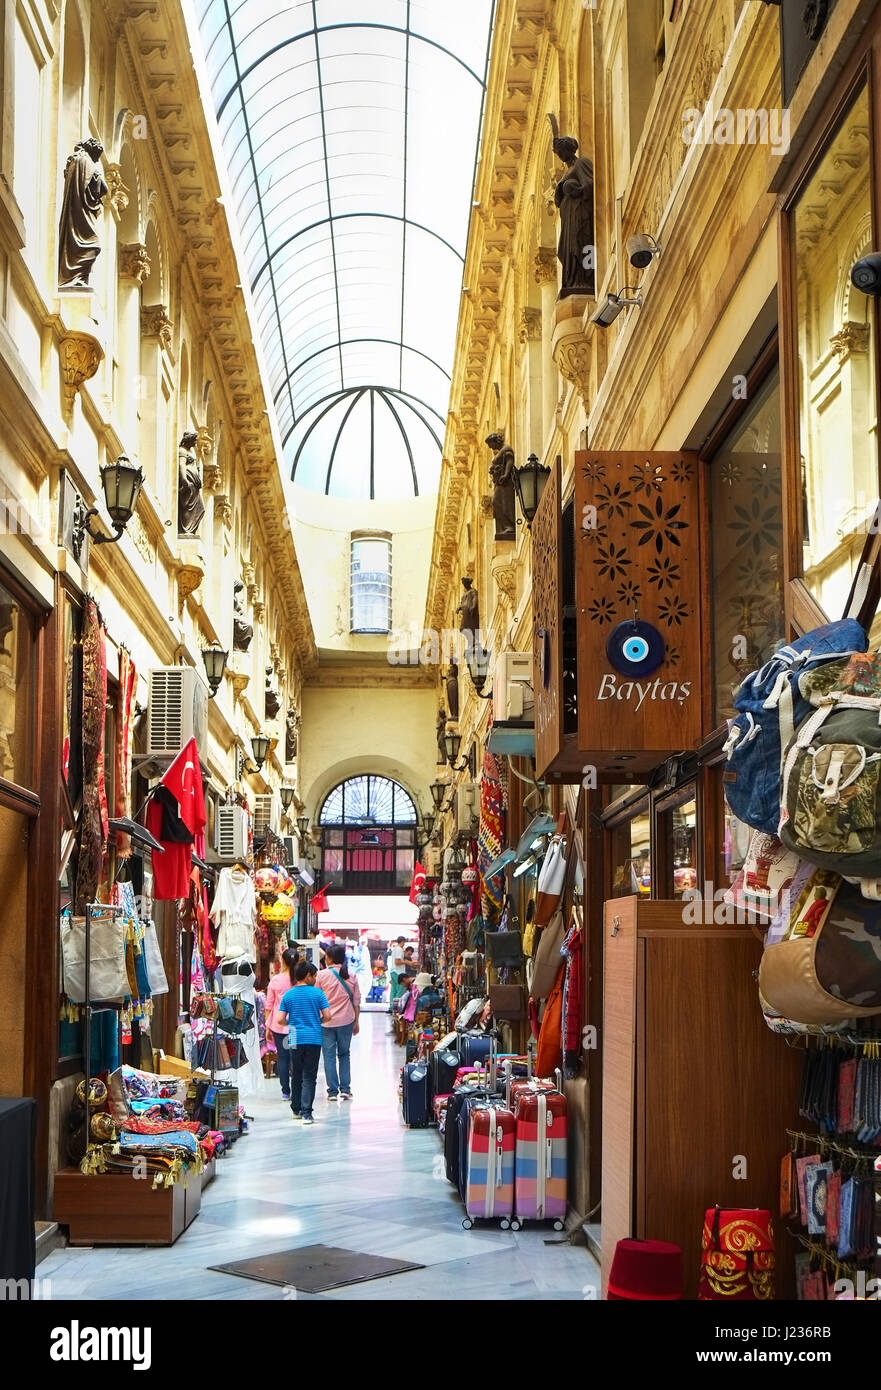 ISTANBUL, TURKEY - JULY 13, 2014: The flower passage  is one of famous landmark on Istiklal Avenue, located in the historic Beyoglu district of Istanb Stock Photo